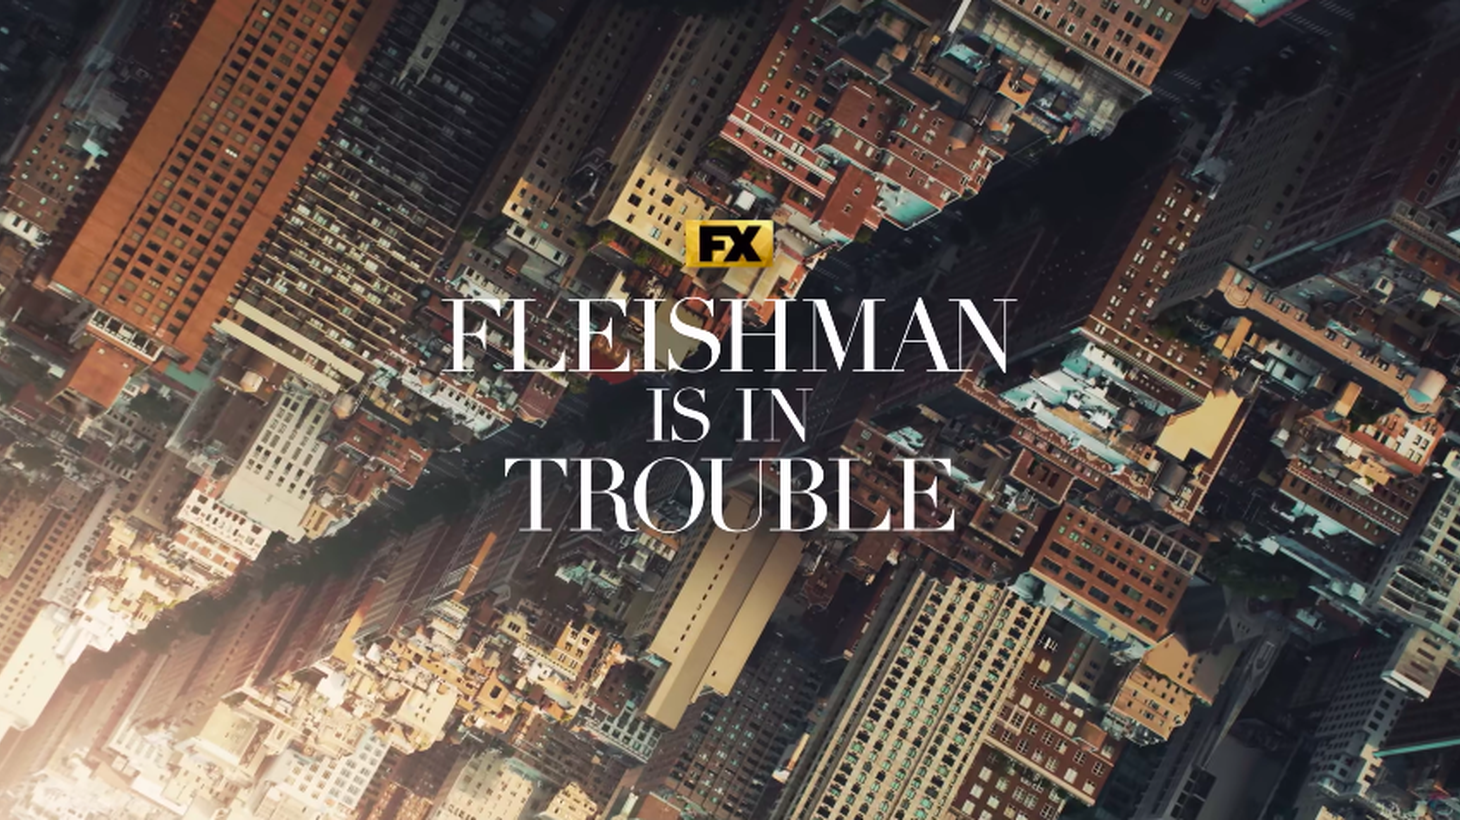 “Fleishman is in Trouble” stars Jesse Eisenberg, Claire Danes, Lizzy Caplan, and Adam Brody.